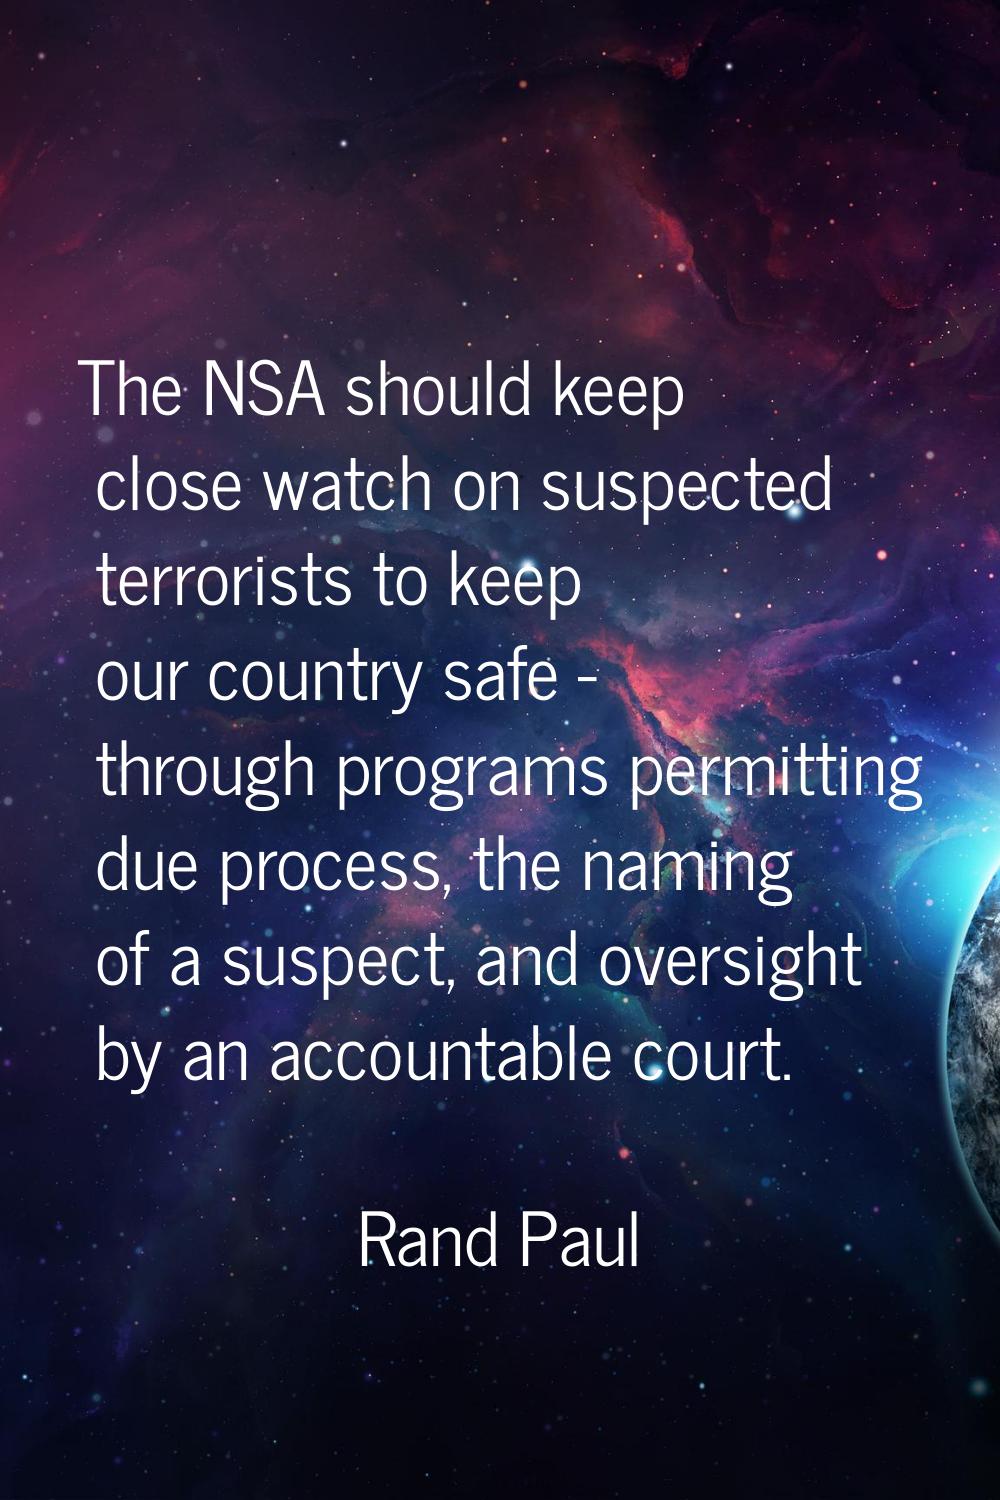 The NSA should keep close watch on suspected terrorists to keep our country safe - through programs